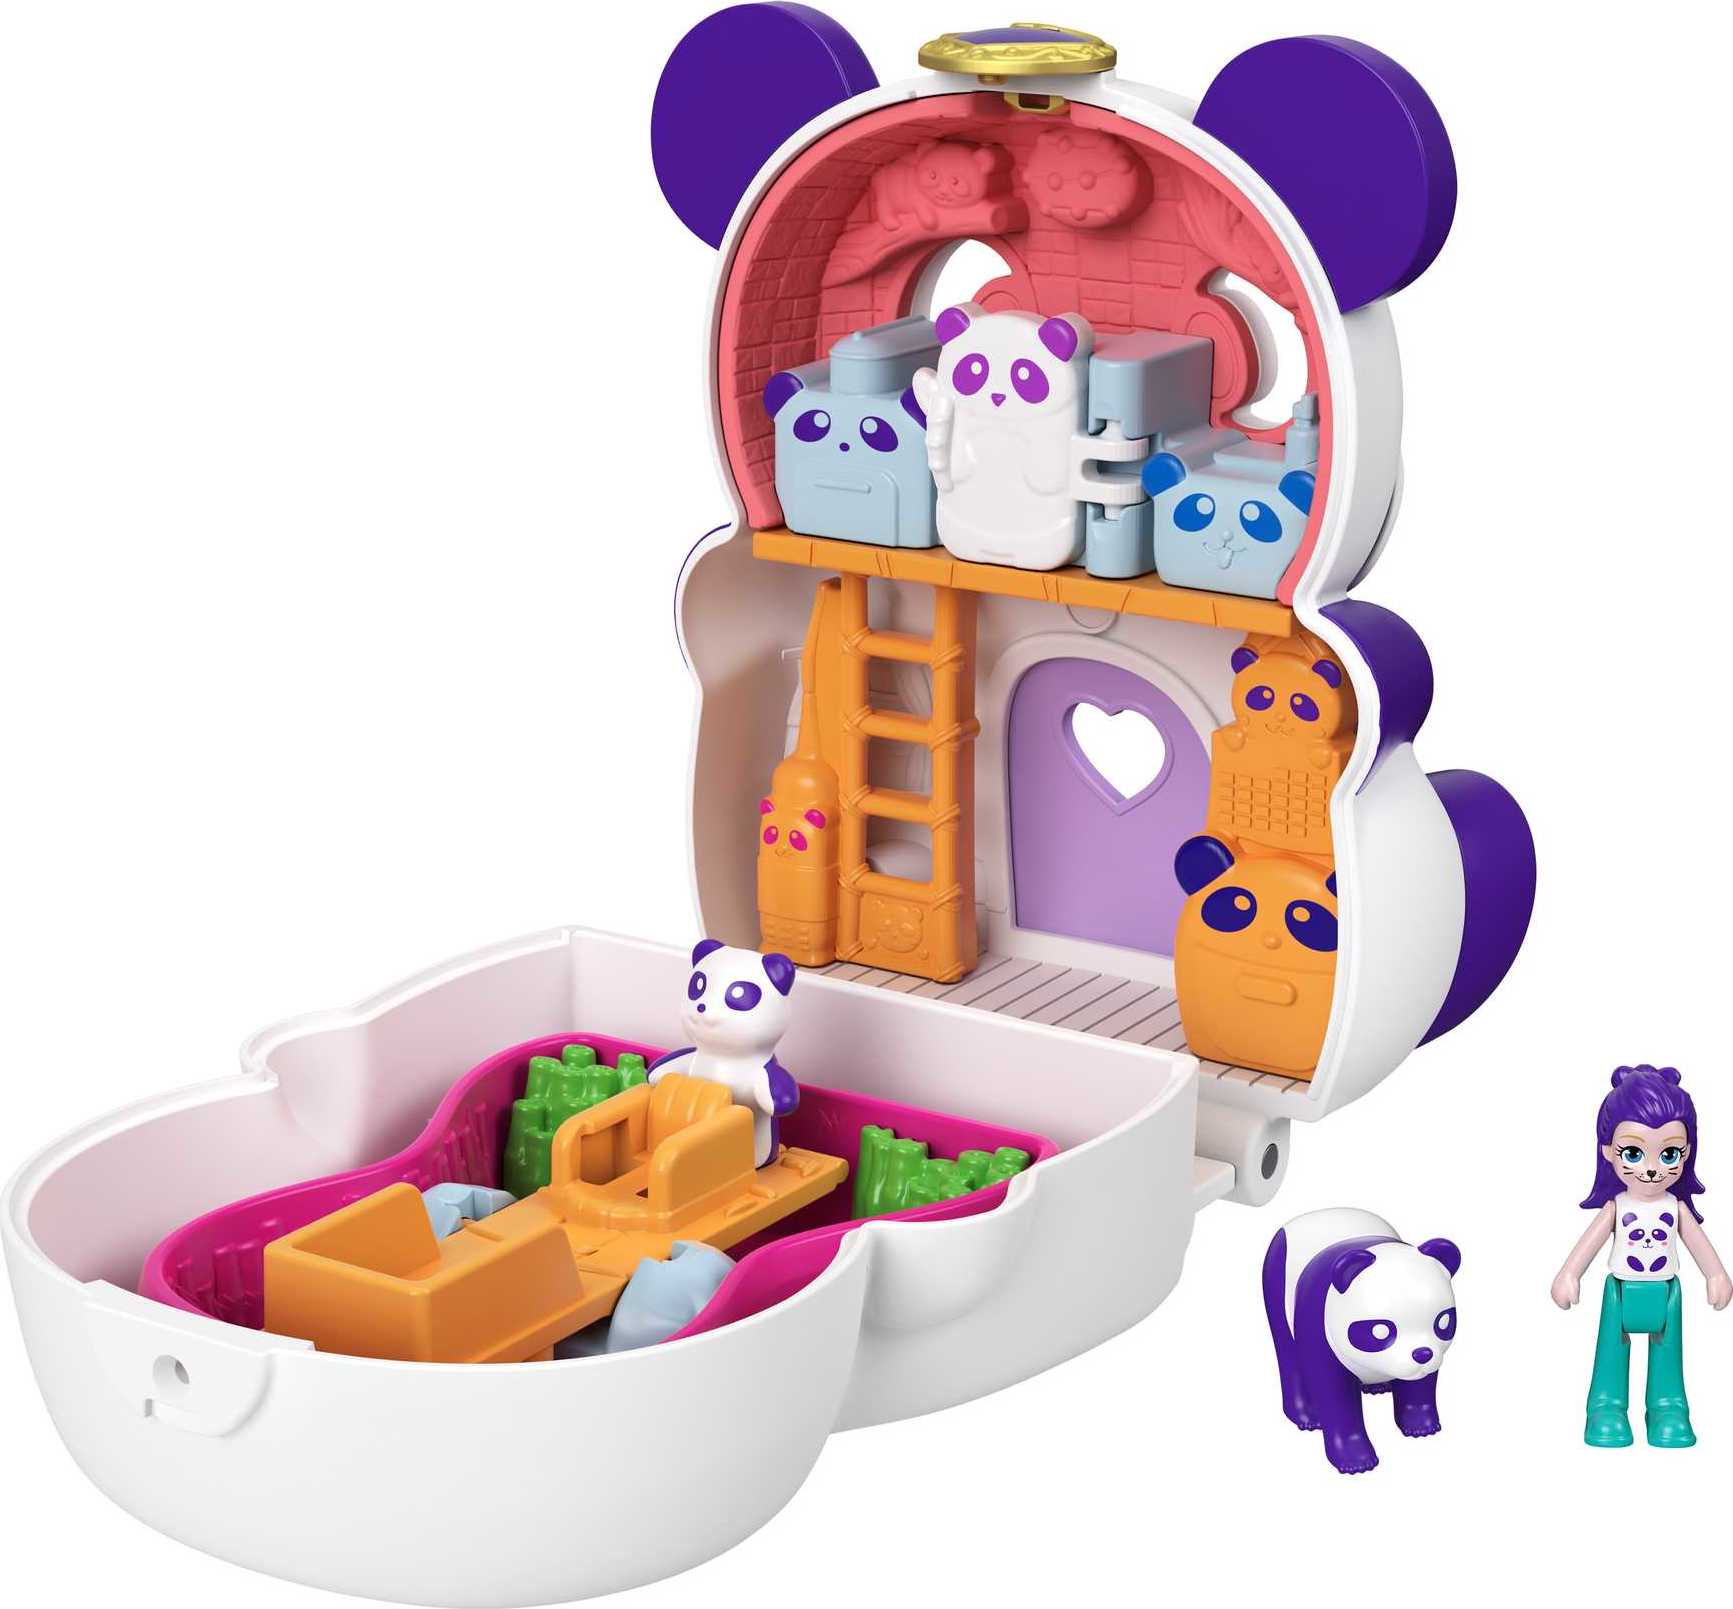 Polly Pocket Flip & Find Panda Compact, Micro Doll, Pet & Accessories, Travel Toy with Flip Bottom - image 1 of 7